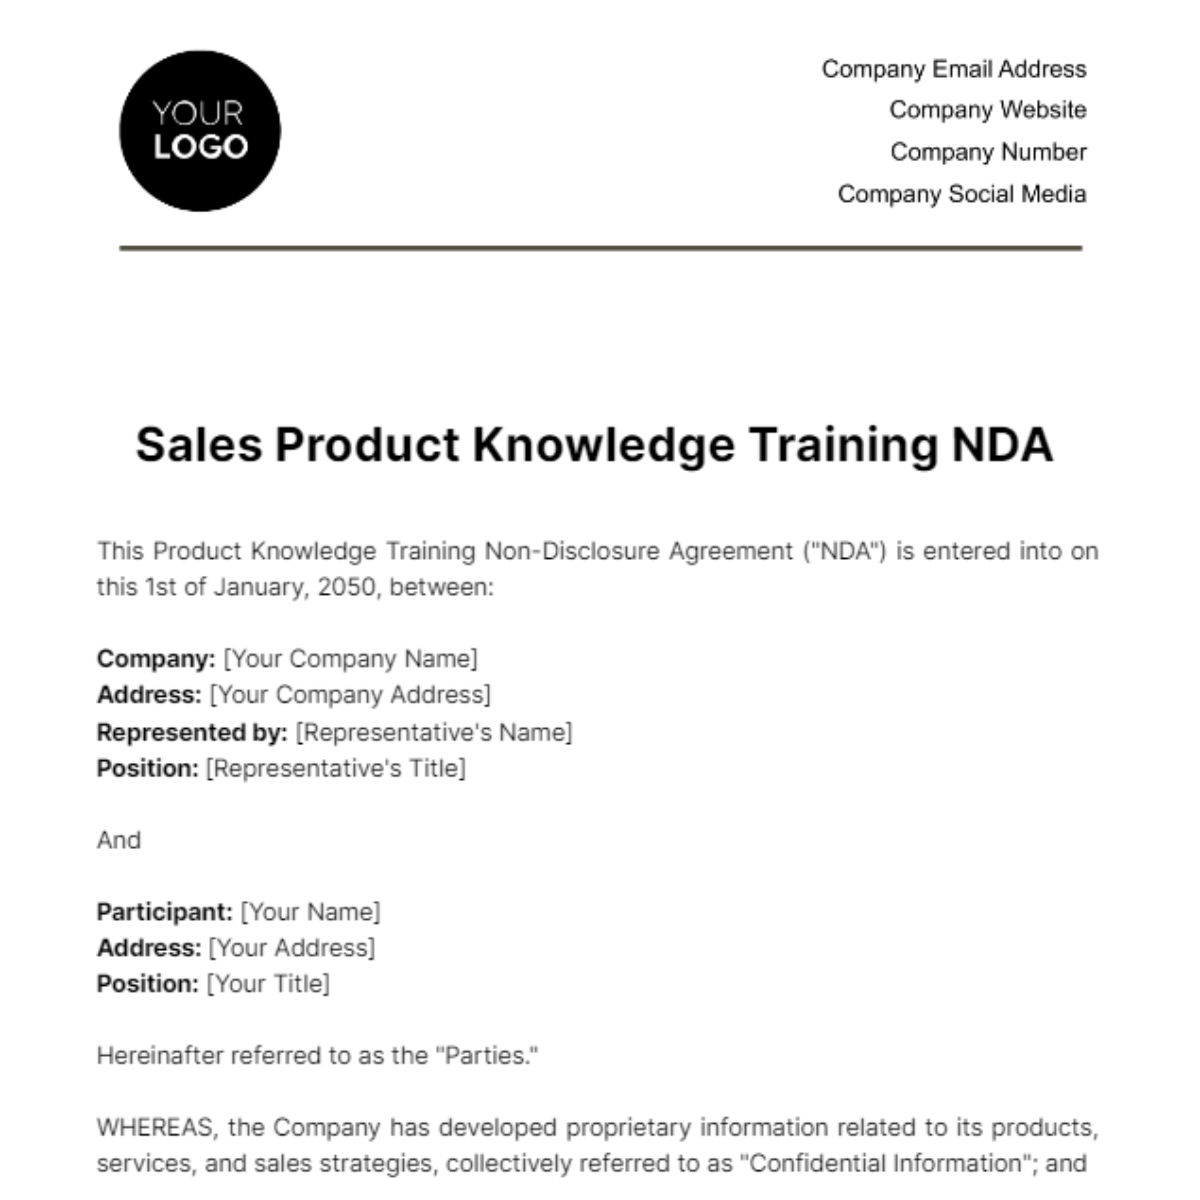 Sales Product Knowledge Training NDA Template